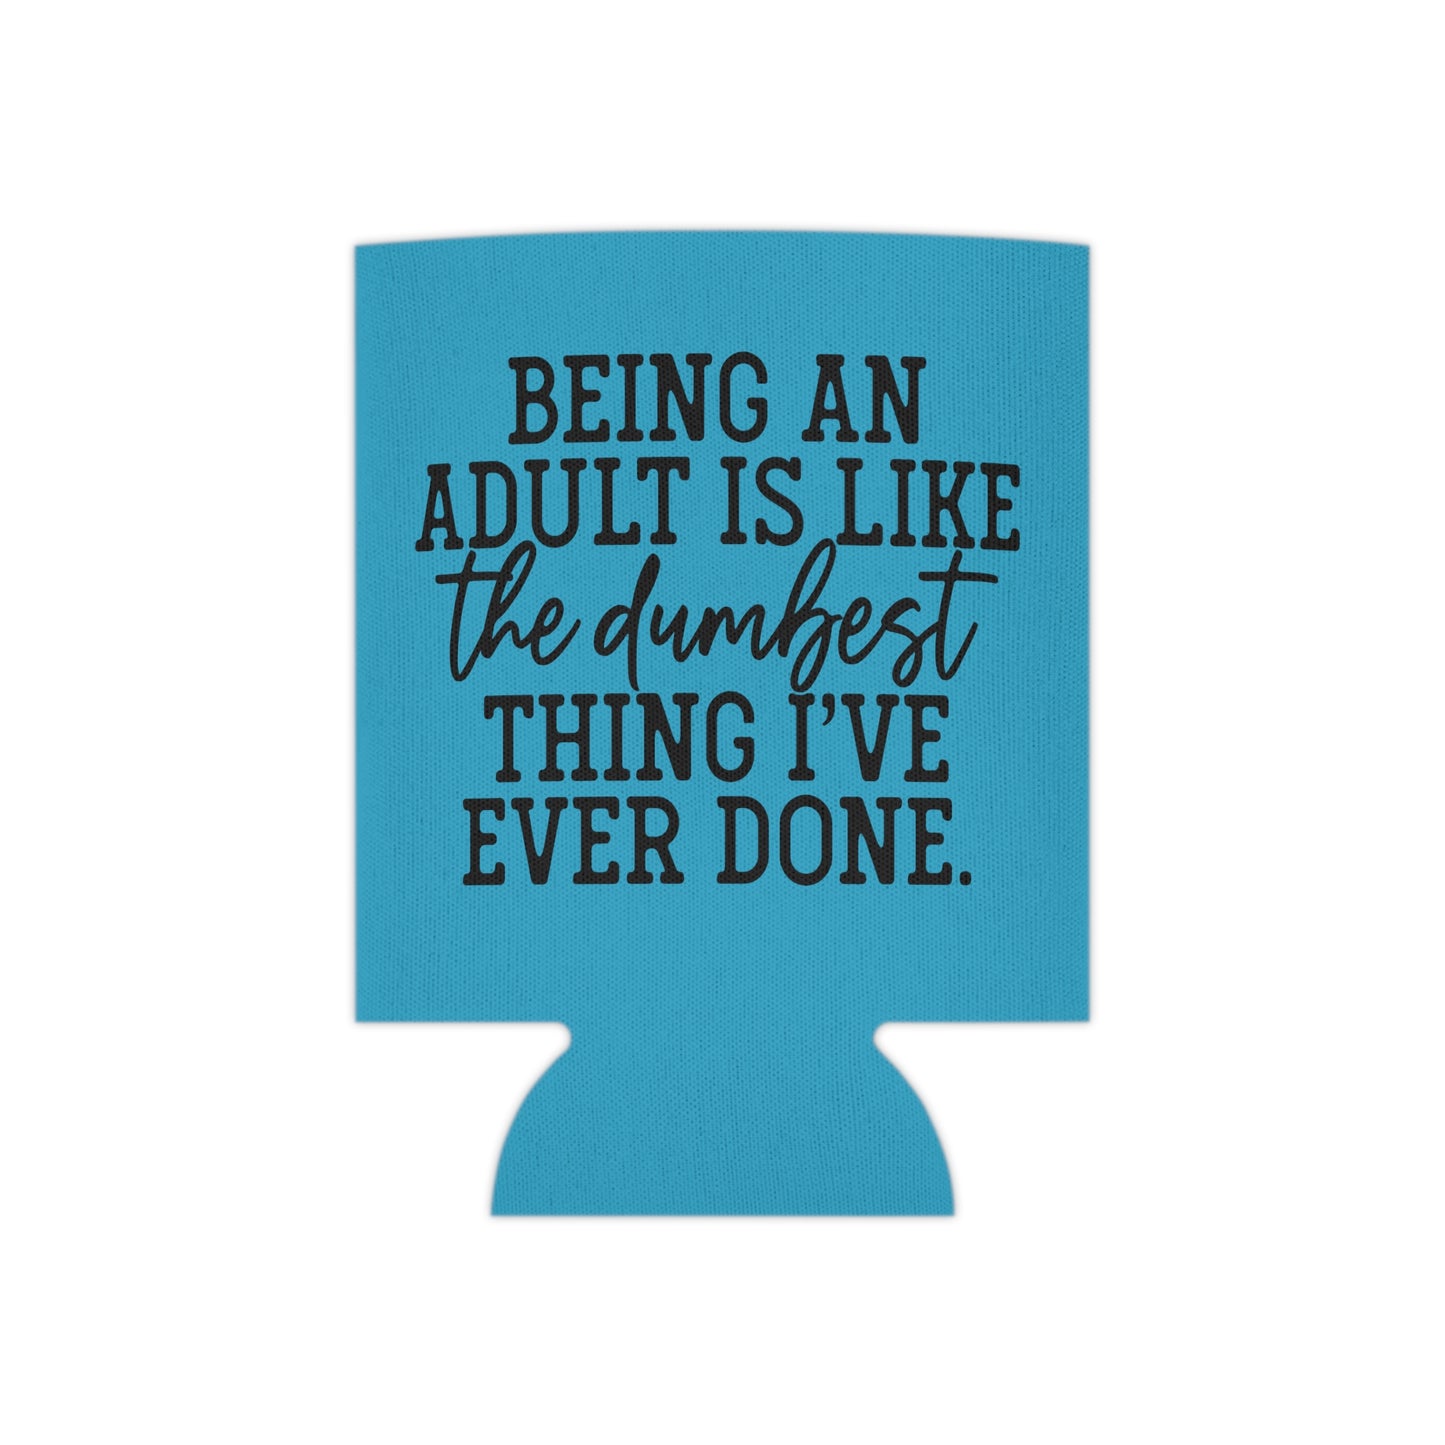 "Being an Adult is like the Dumbest Thing I've Ever Done" Can Cooler - Teal